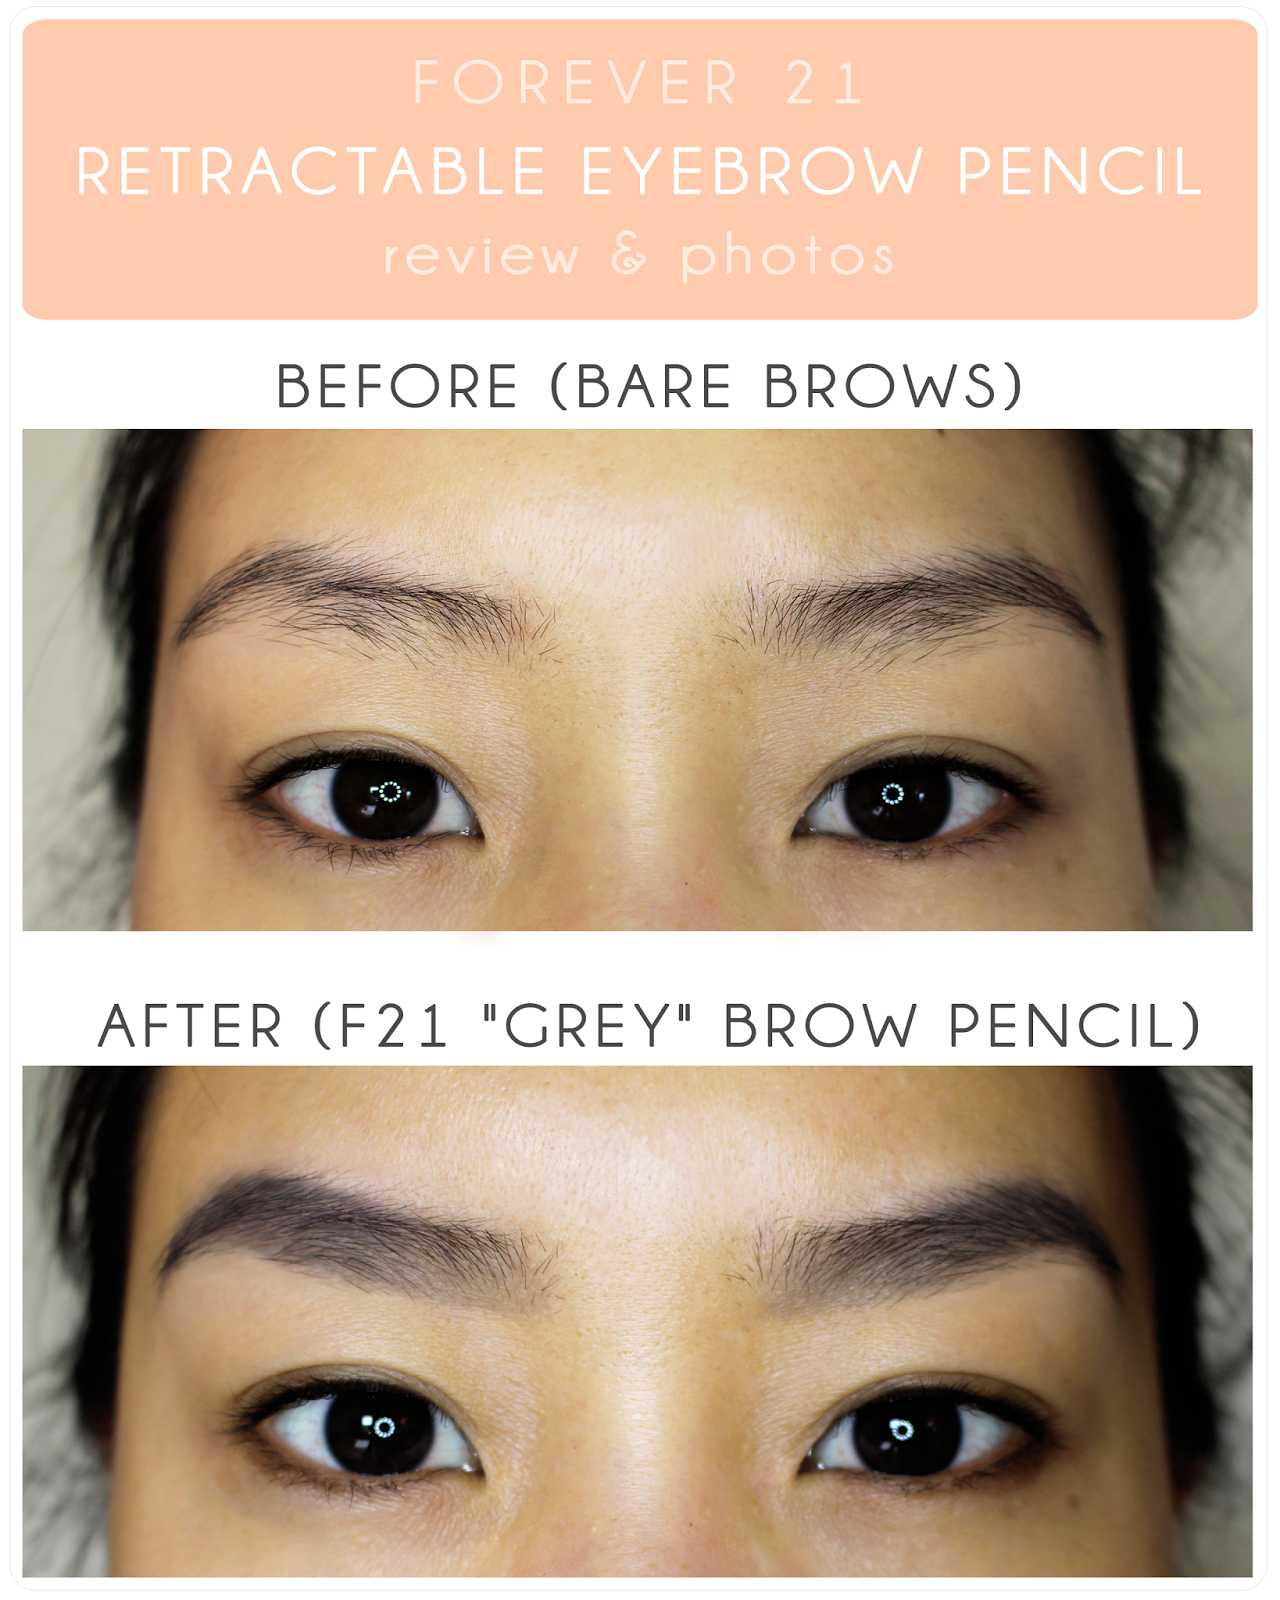 ... this forever 21 eyebrow pencil has definitely been the best bang for